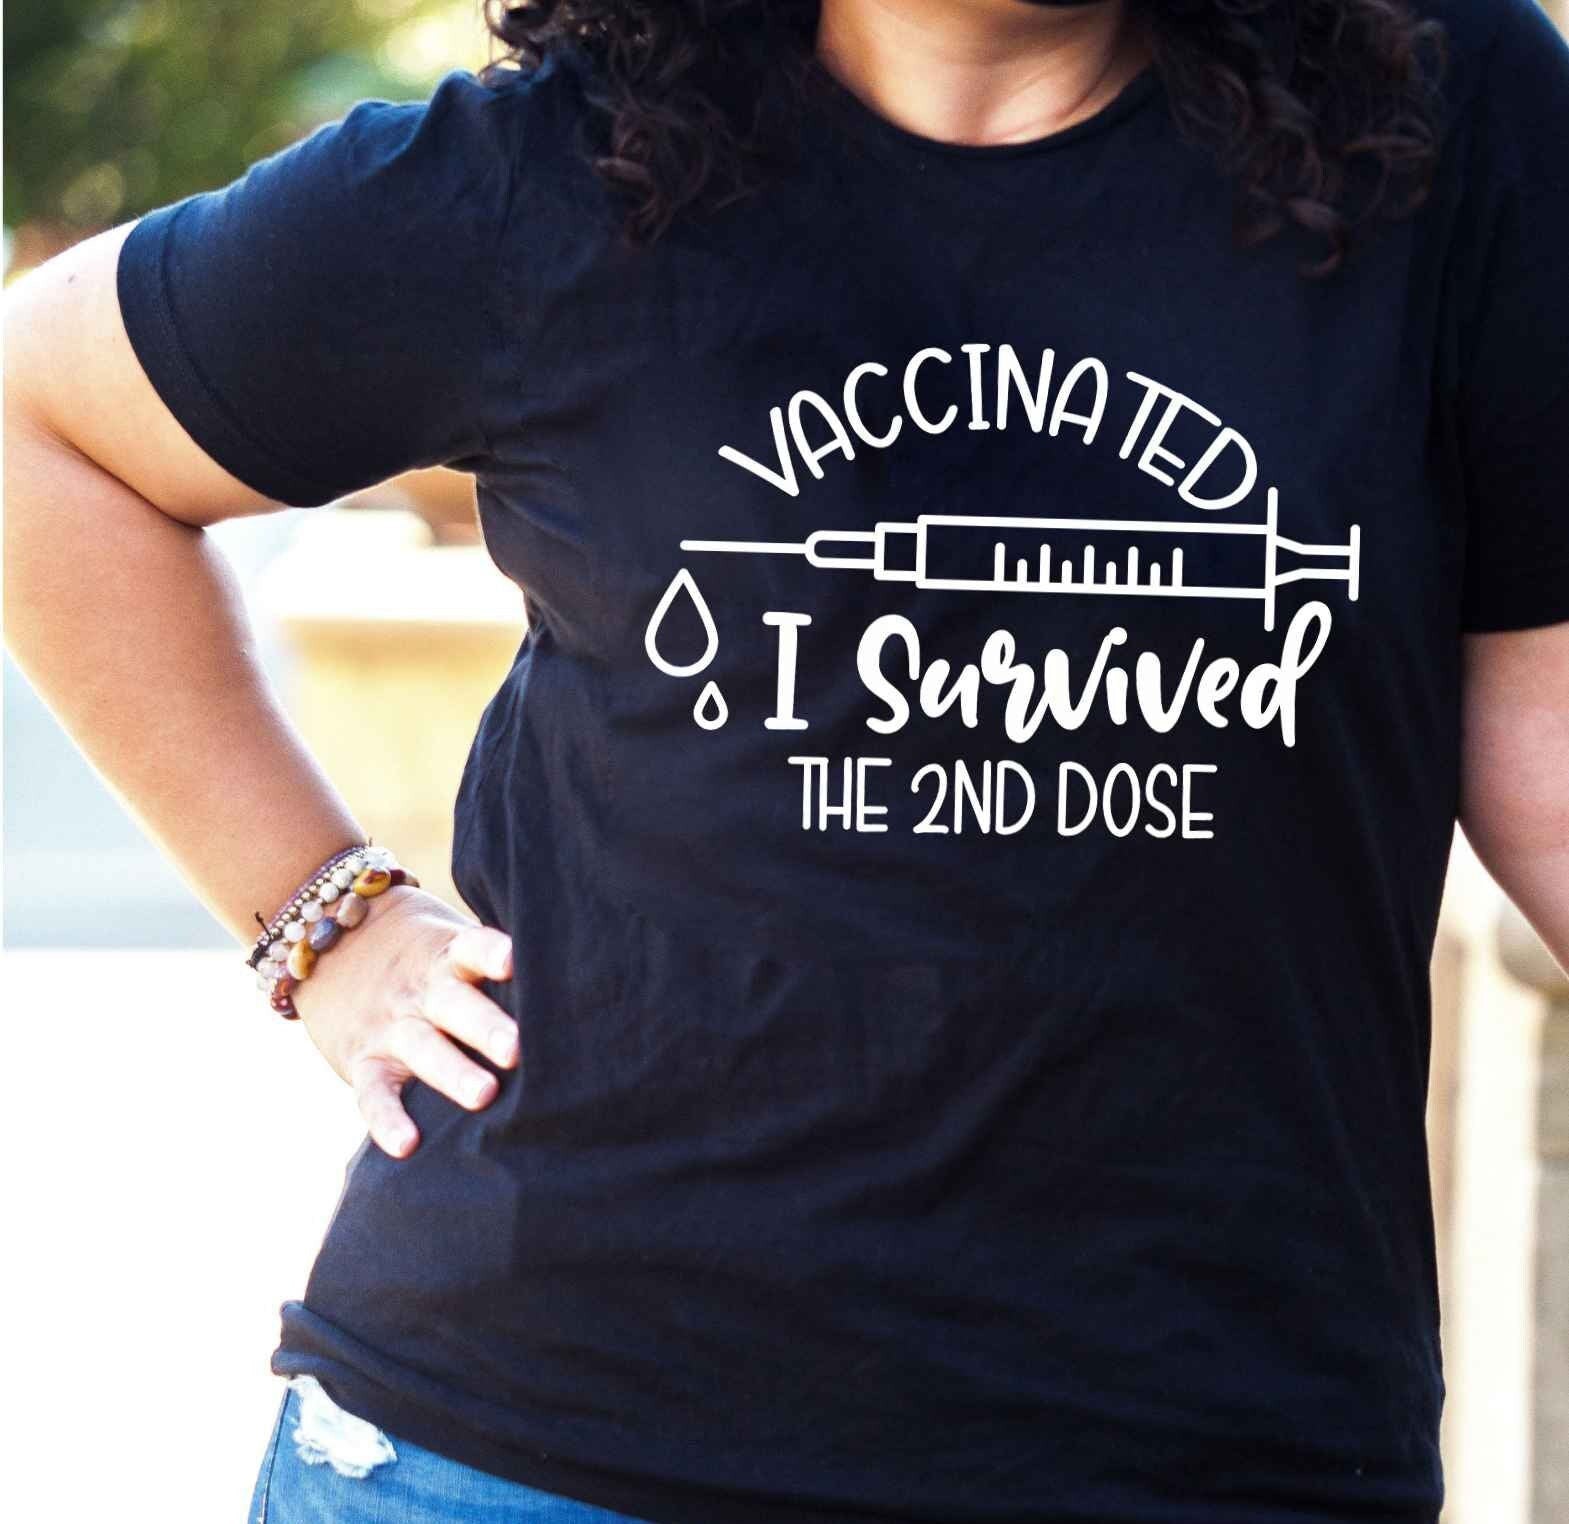 Vaccinated I Survived the 2nd Dose unisex t-shirt • super soft tees for women • vaccinated shirt • proudly vaccinated